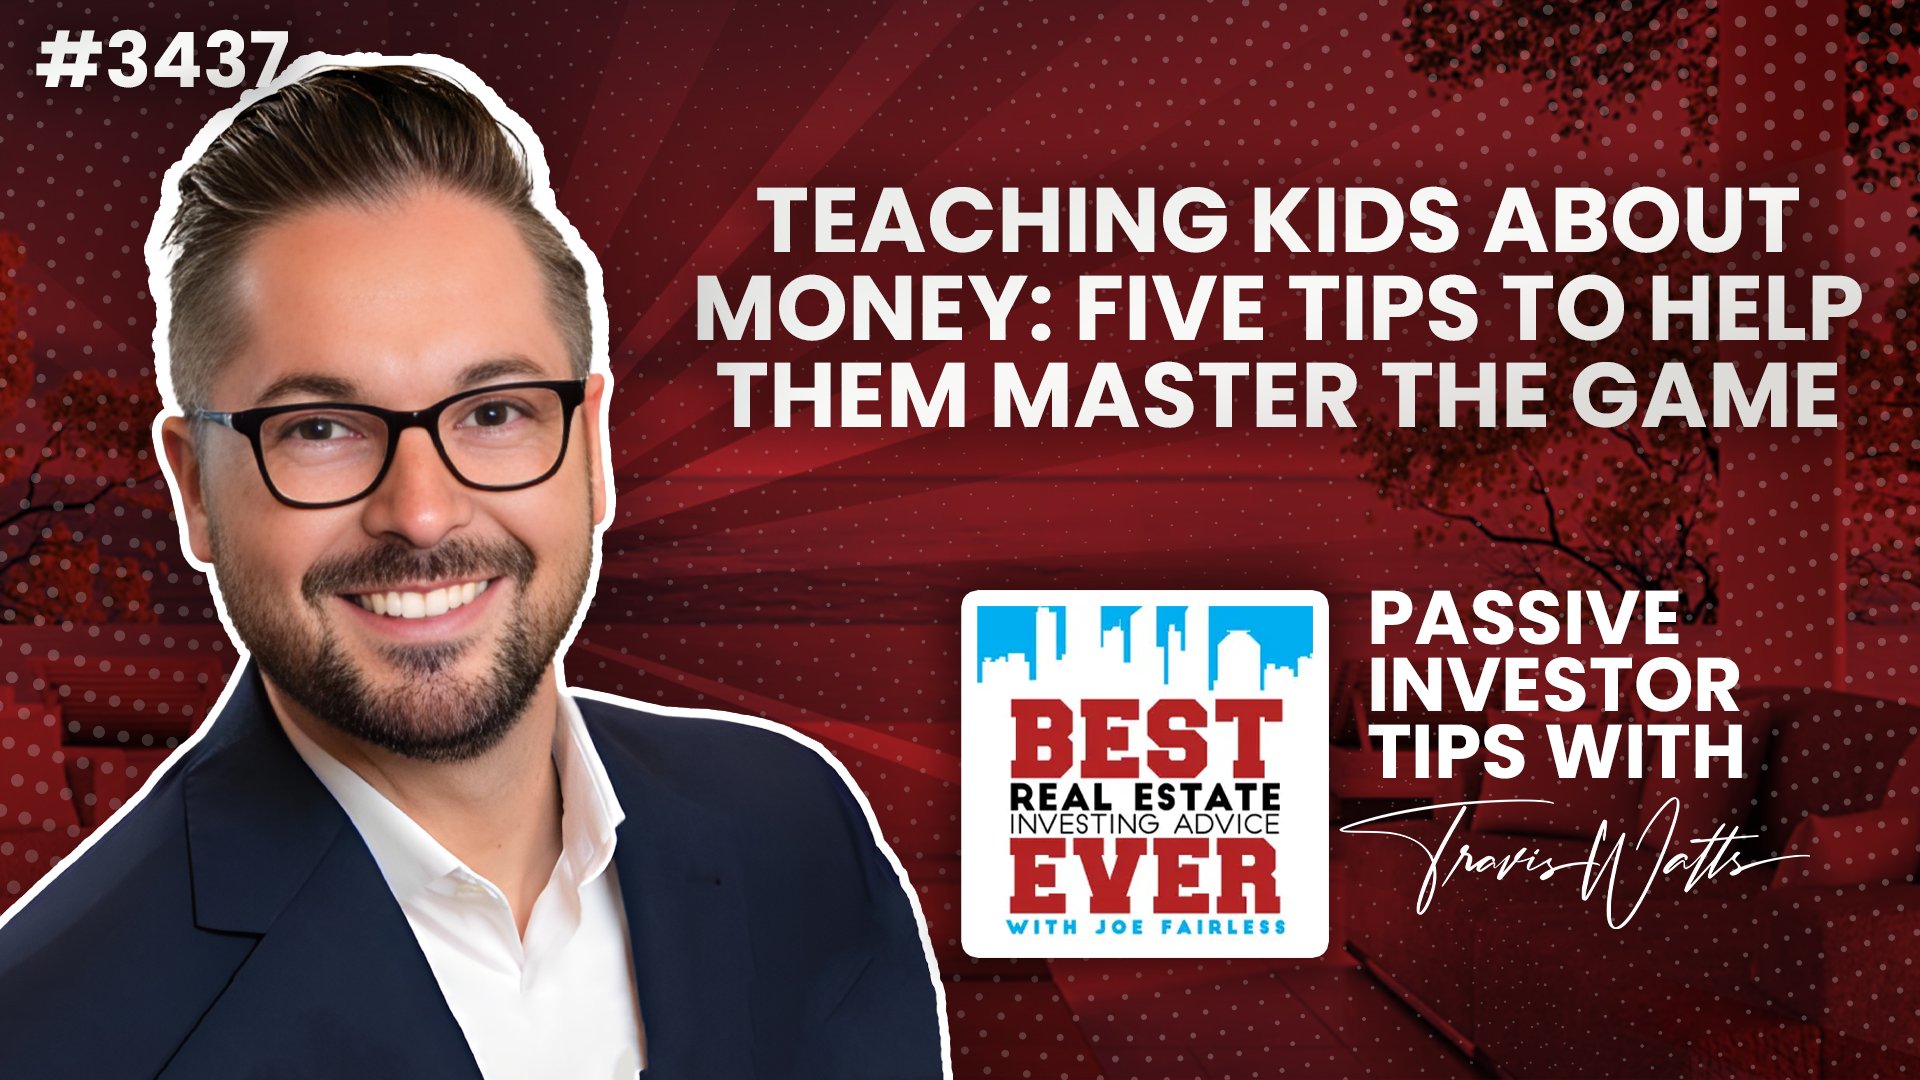 JF3437: Teaching Kids About Money: Five Tips to Help Them Master the Game | Passive Investor Tips ft. Travis Watts